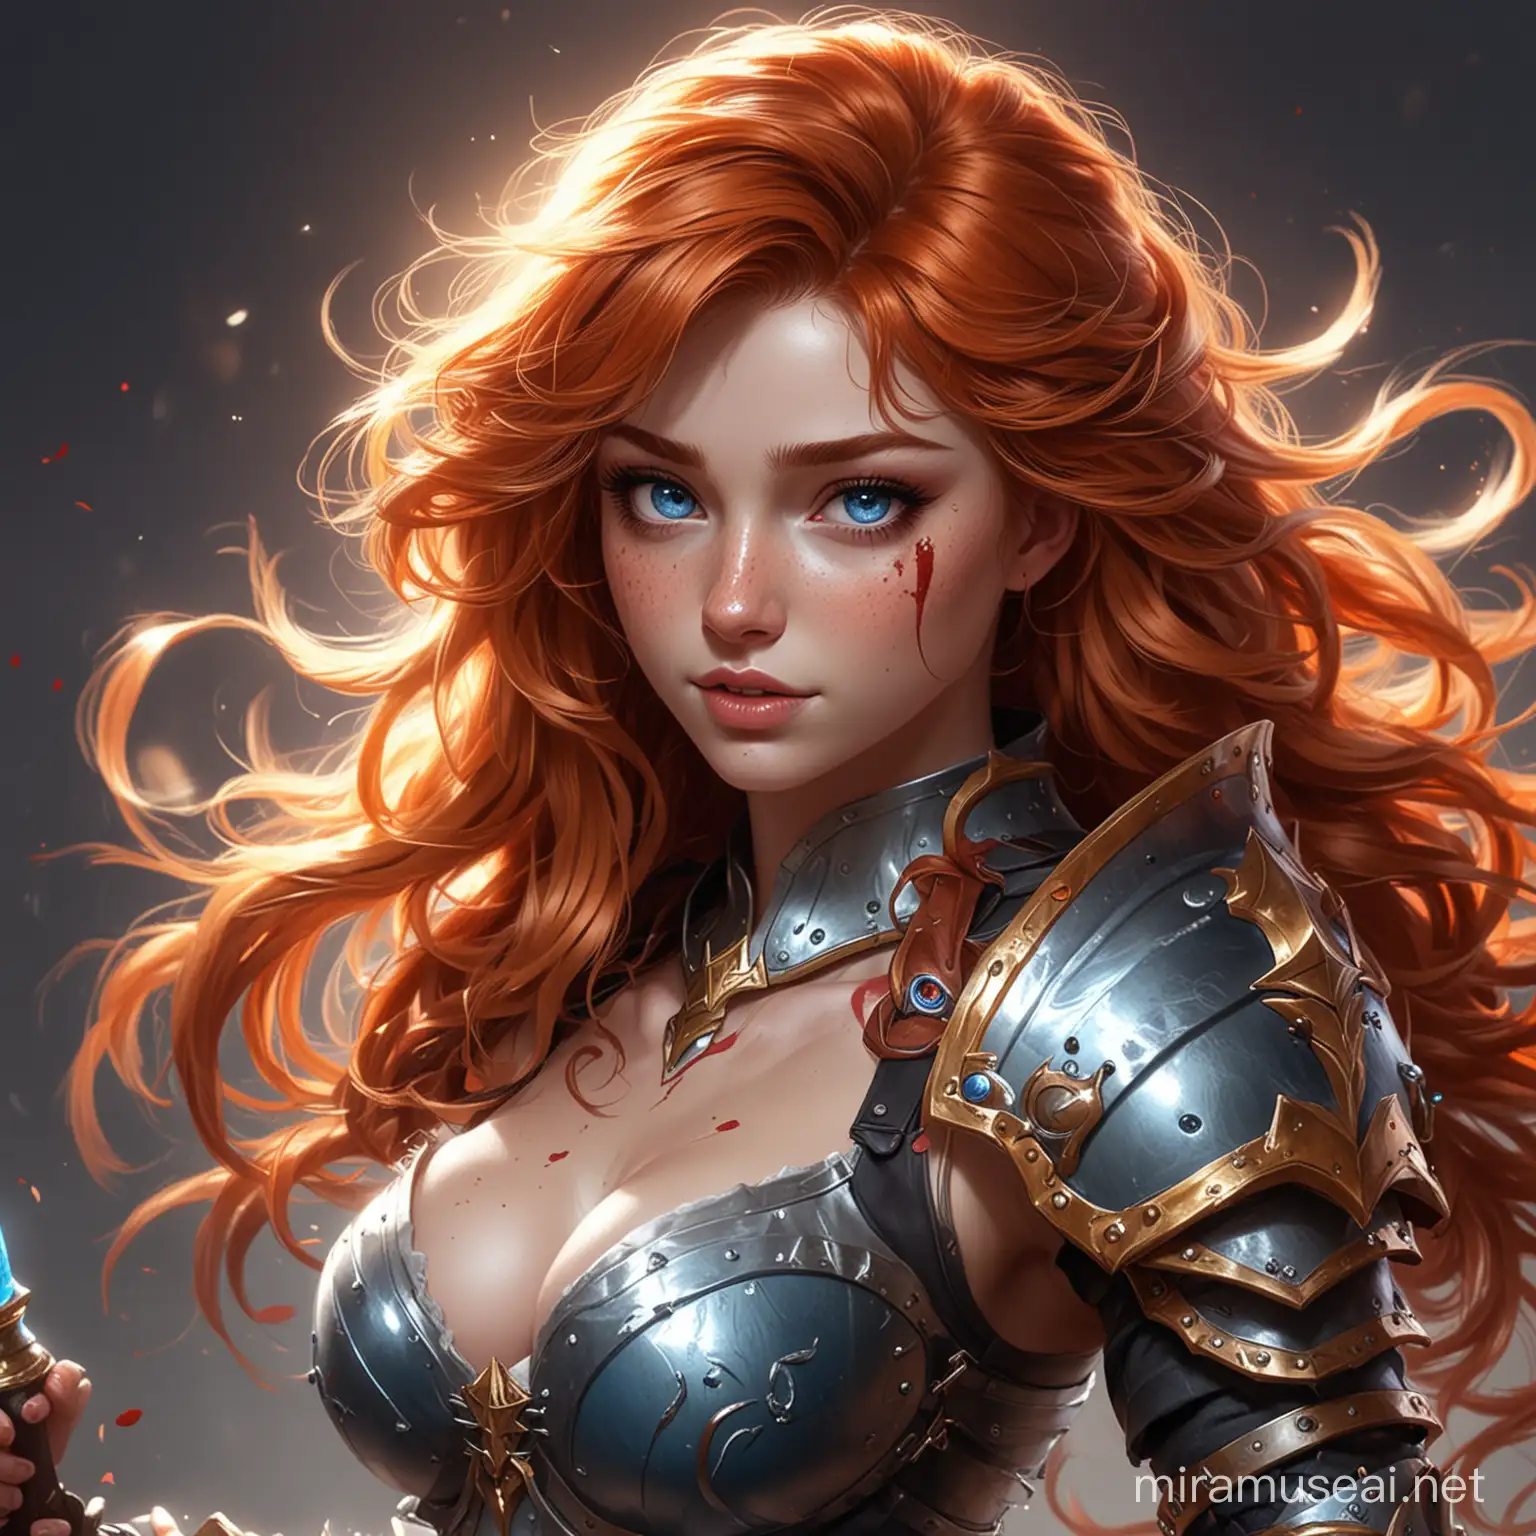 Gingerhaired Warrior Fiery Defender with Blue Eyes and Battle Scars